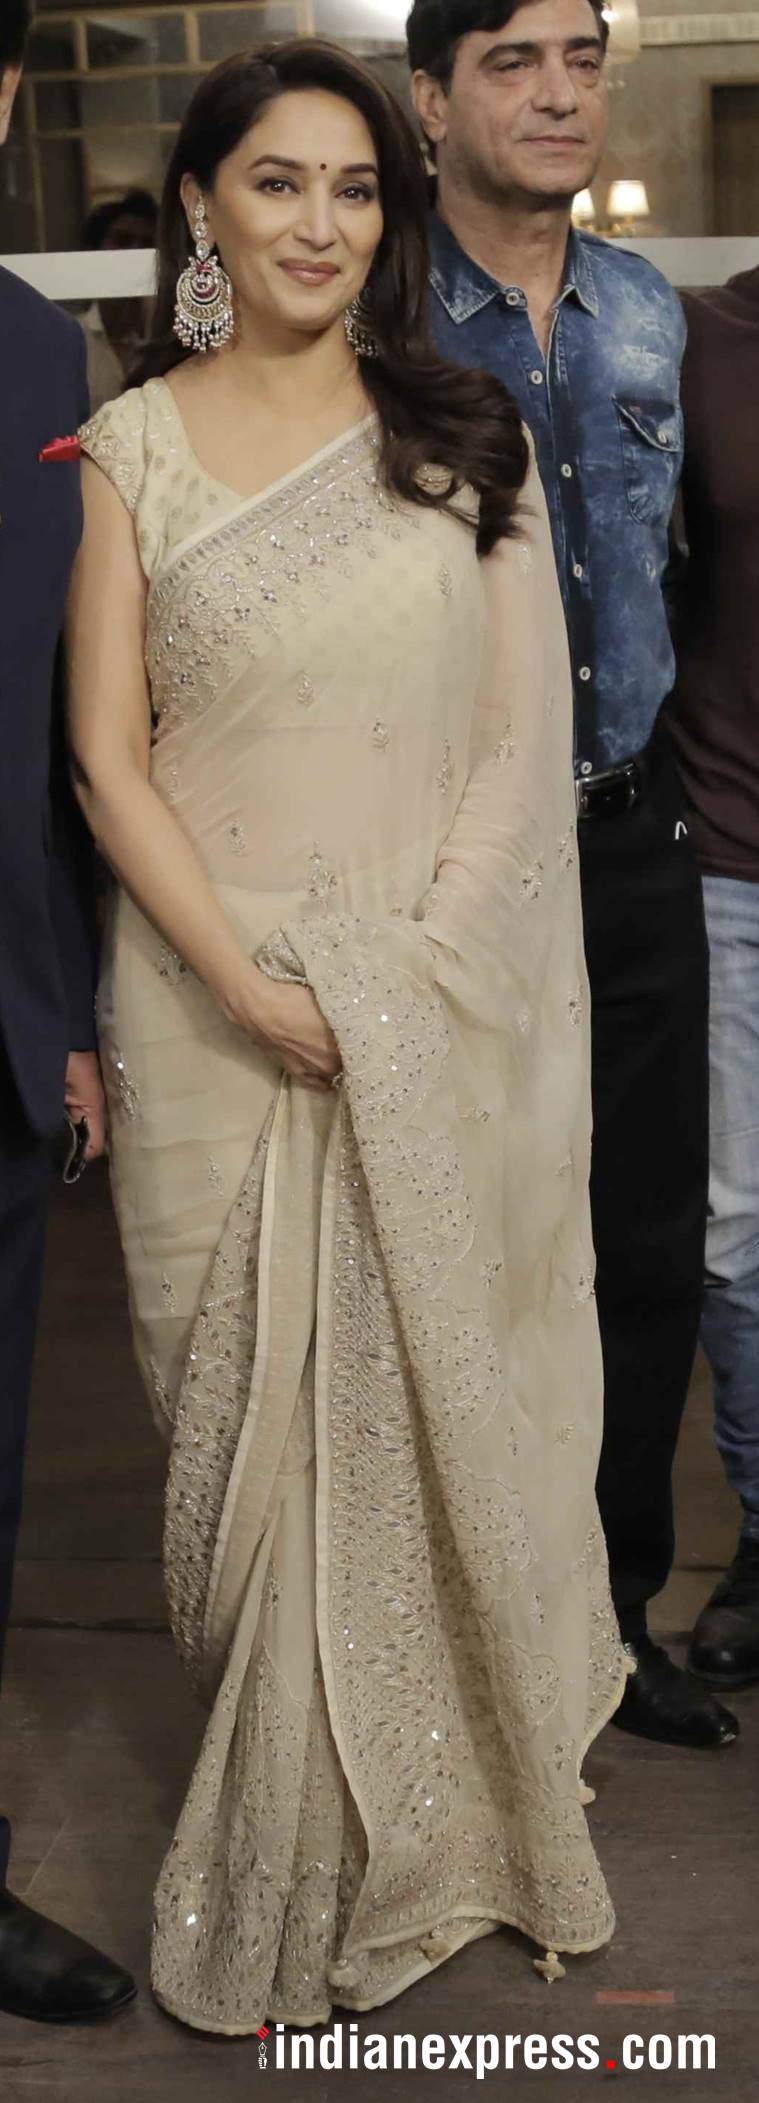 Bollywood Actress Madhuri Dixit Nude - Madhuri Dixit's lovely Anita Dongre sari will inspire you to go for nude  ethnic wear | Lifestyle News,The Indian Express